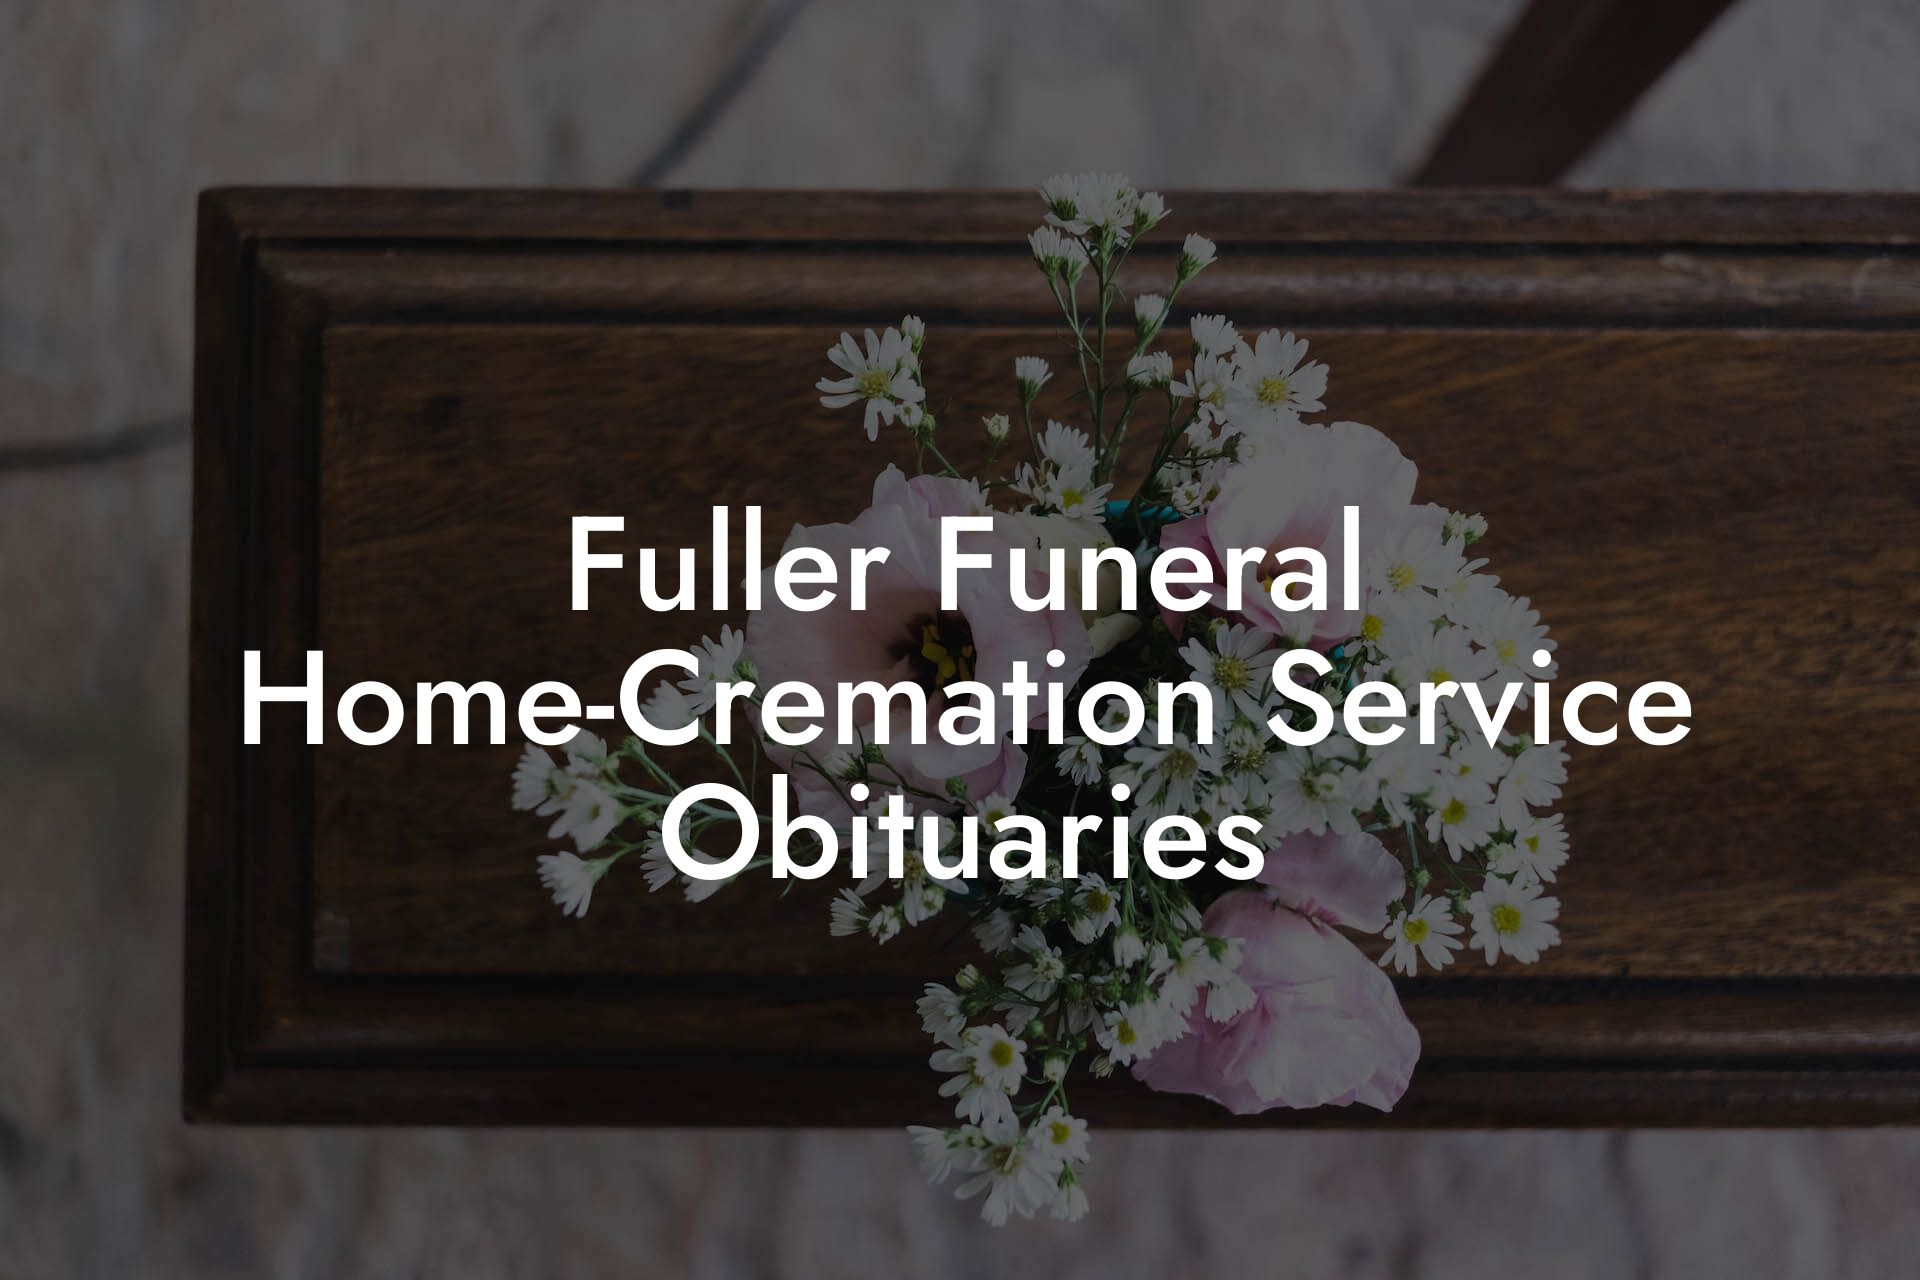 Fuller Funeral Home-Cremation Service Obituaries